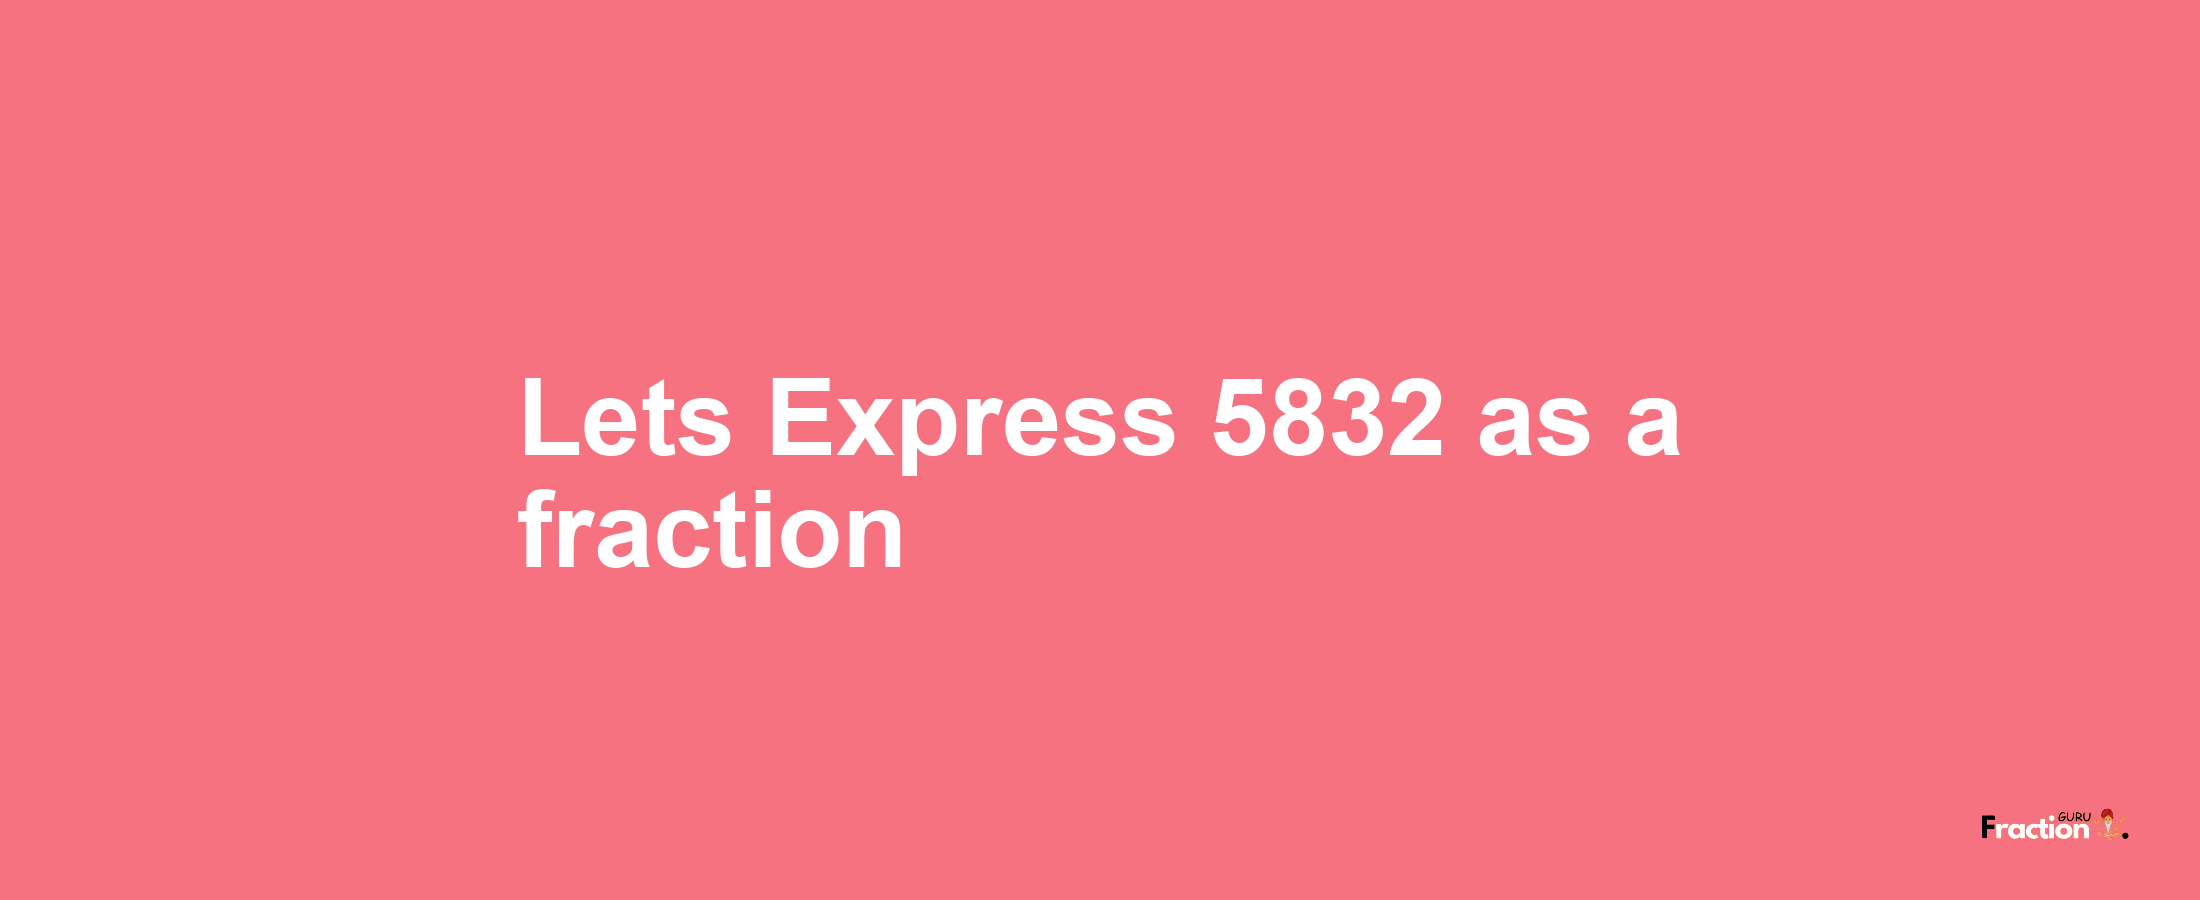 Lets Express 5832 as afraction